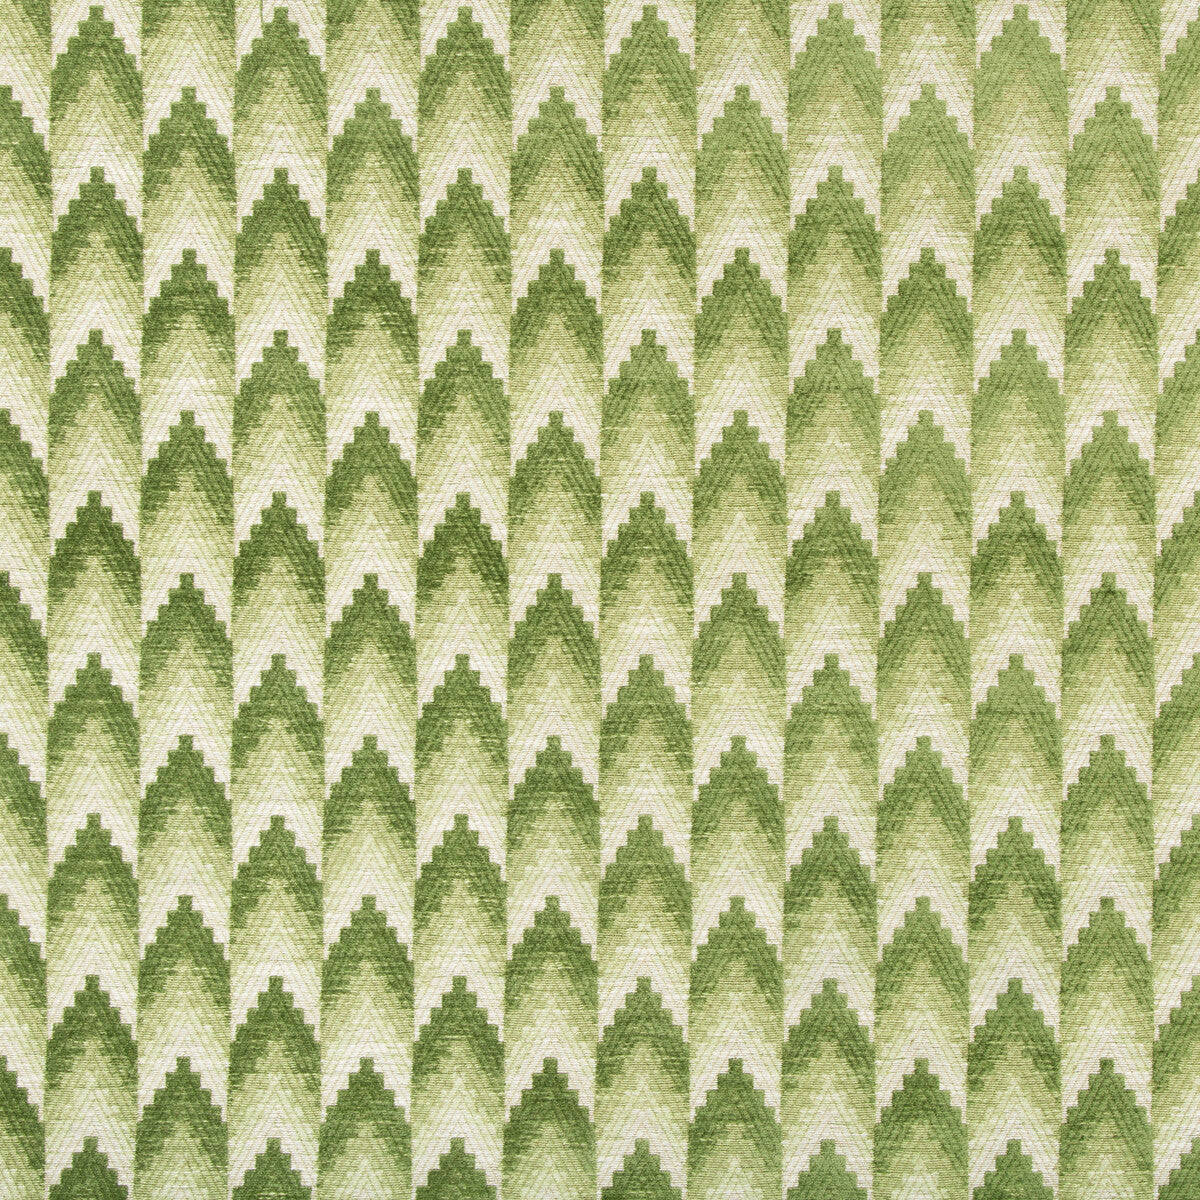 Ventron Woven fabric in leaf color - pattern 8019118.3.0 - by Brunschwig &amp; Fils in the Alsace Weaves collection